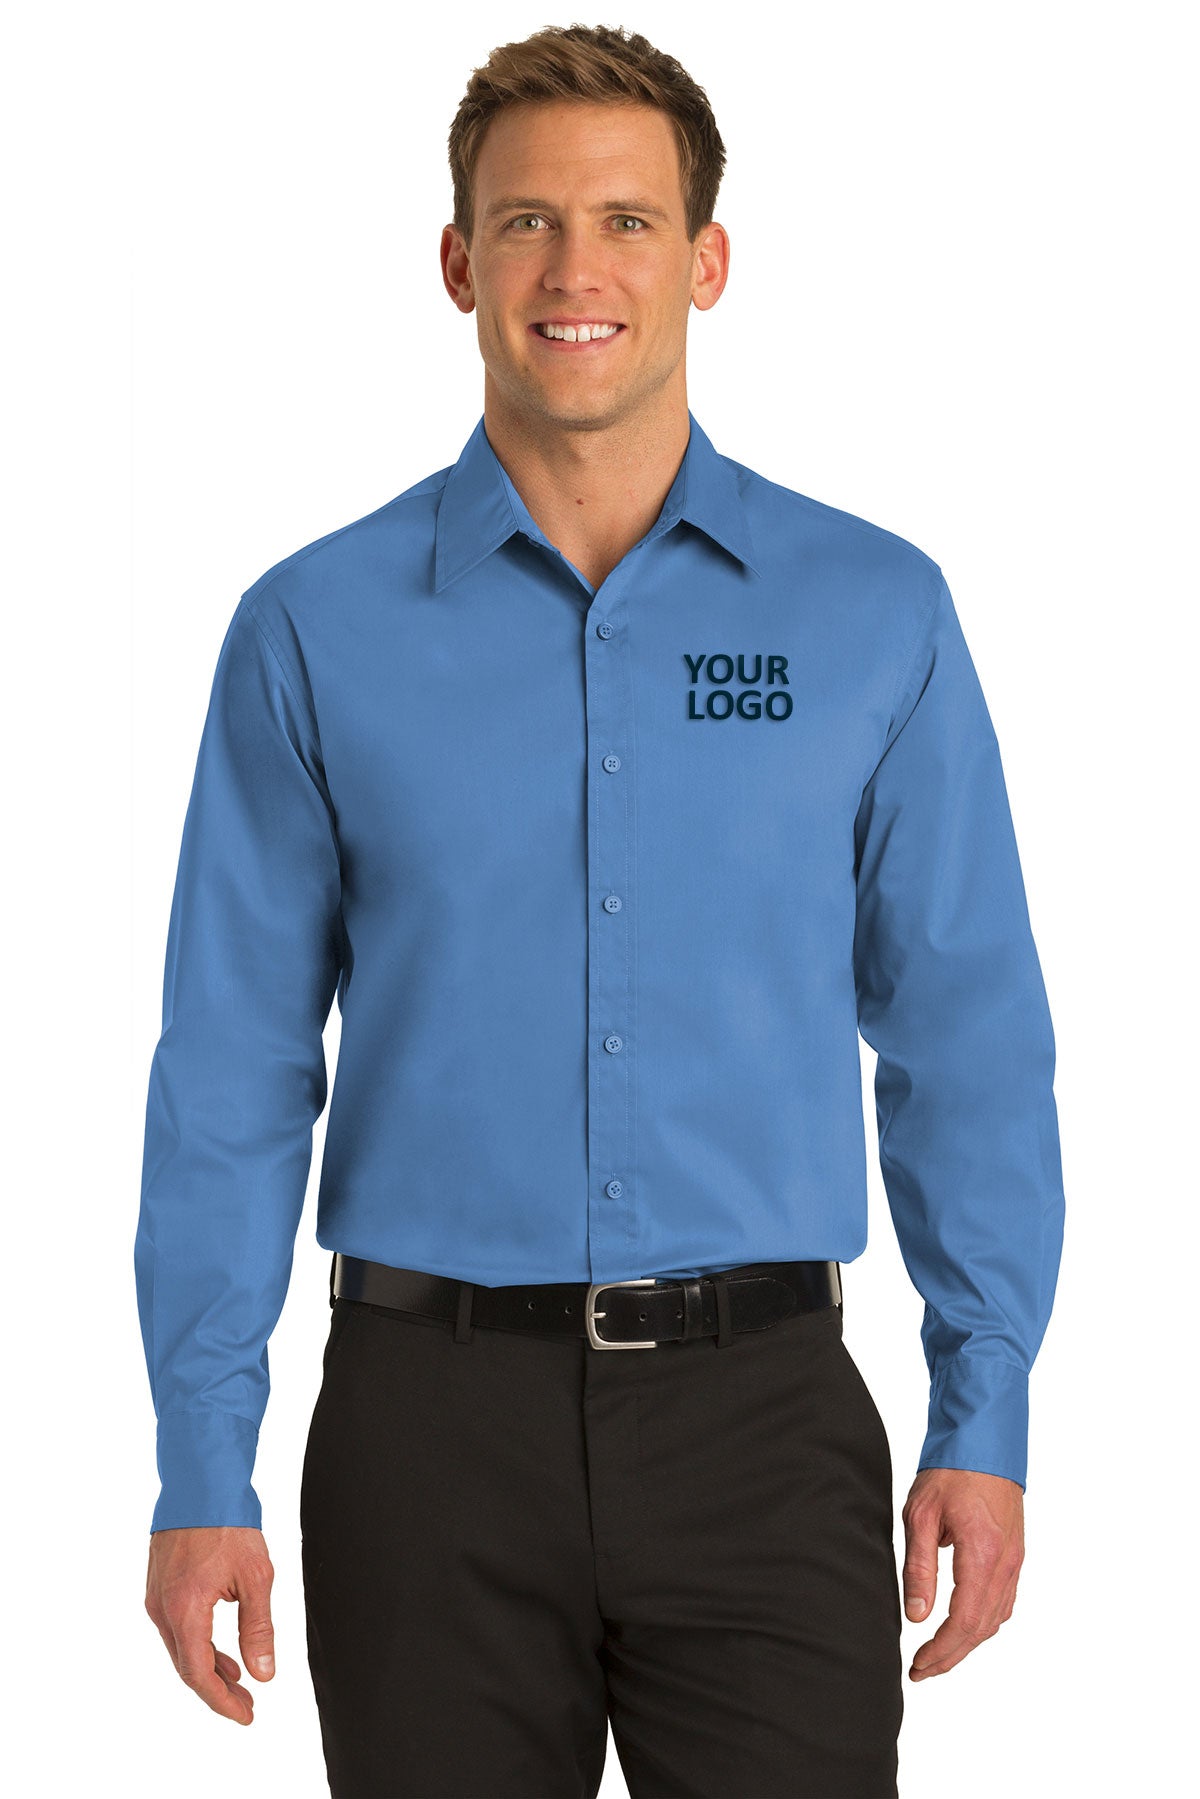 Port Authority Moonlight Blue S646 custom embroidered shirts